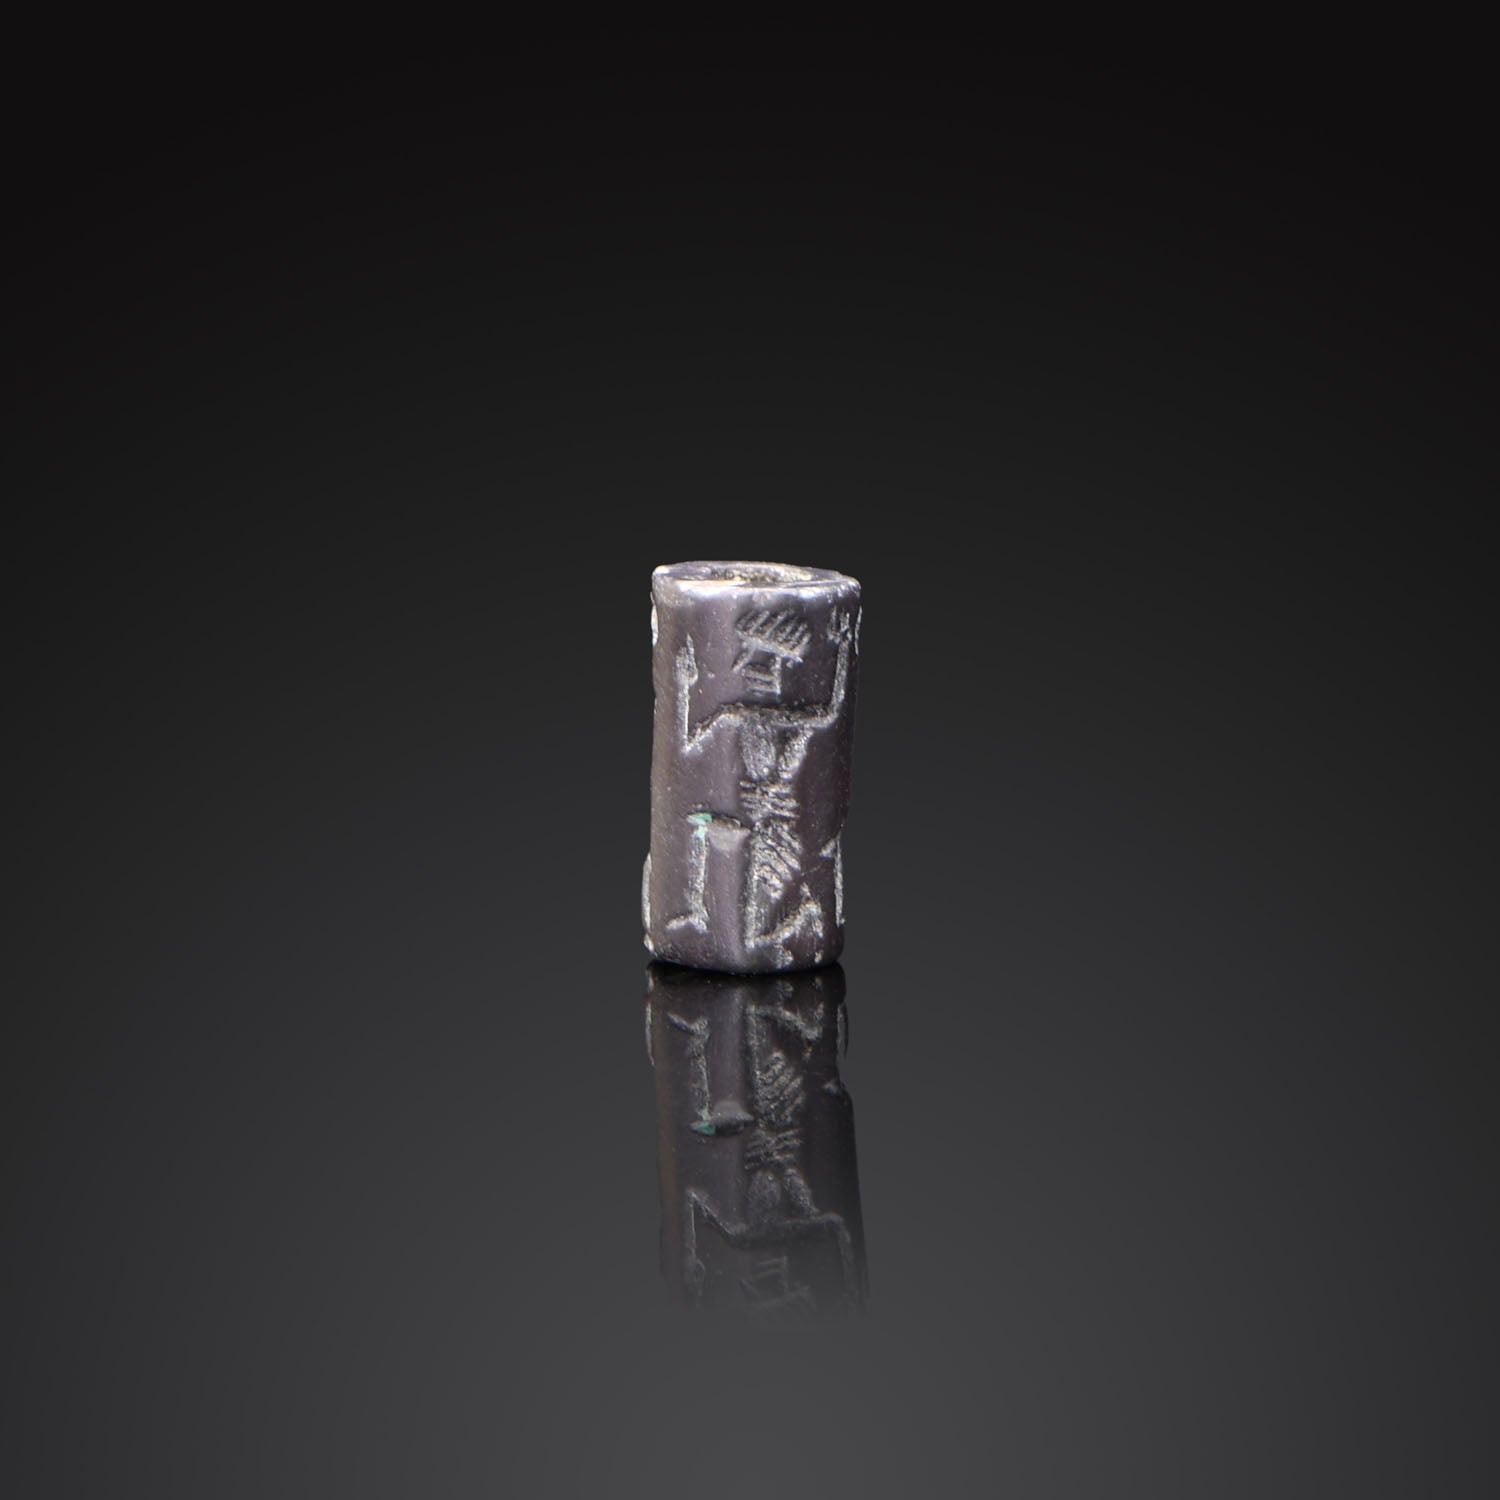 An Old Babylonian Cylinder Seal, ca. 2000 - 1600 BCE